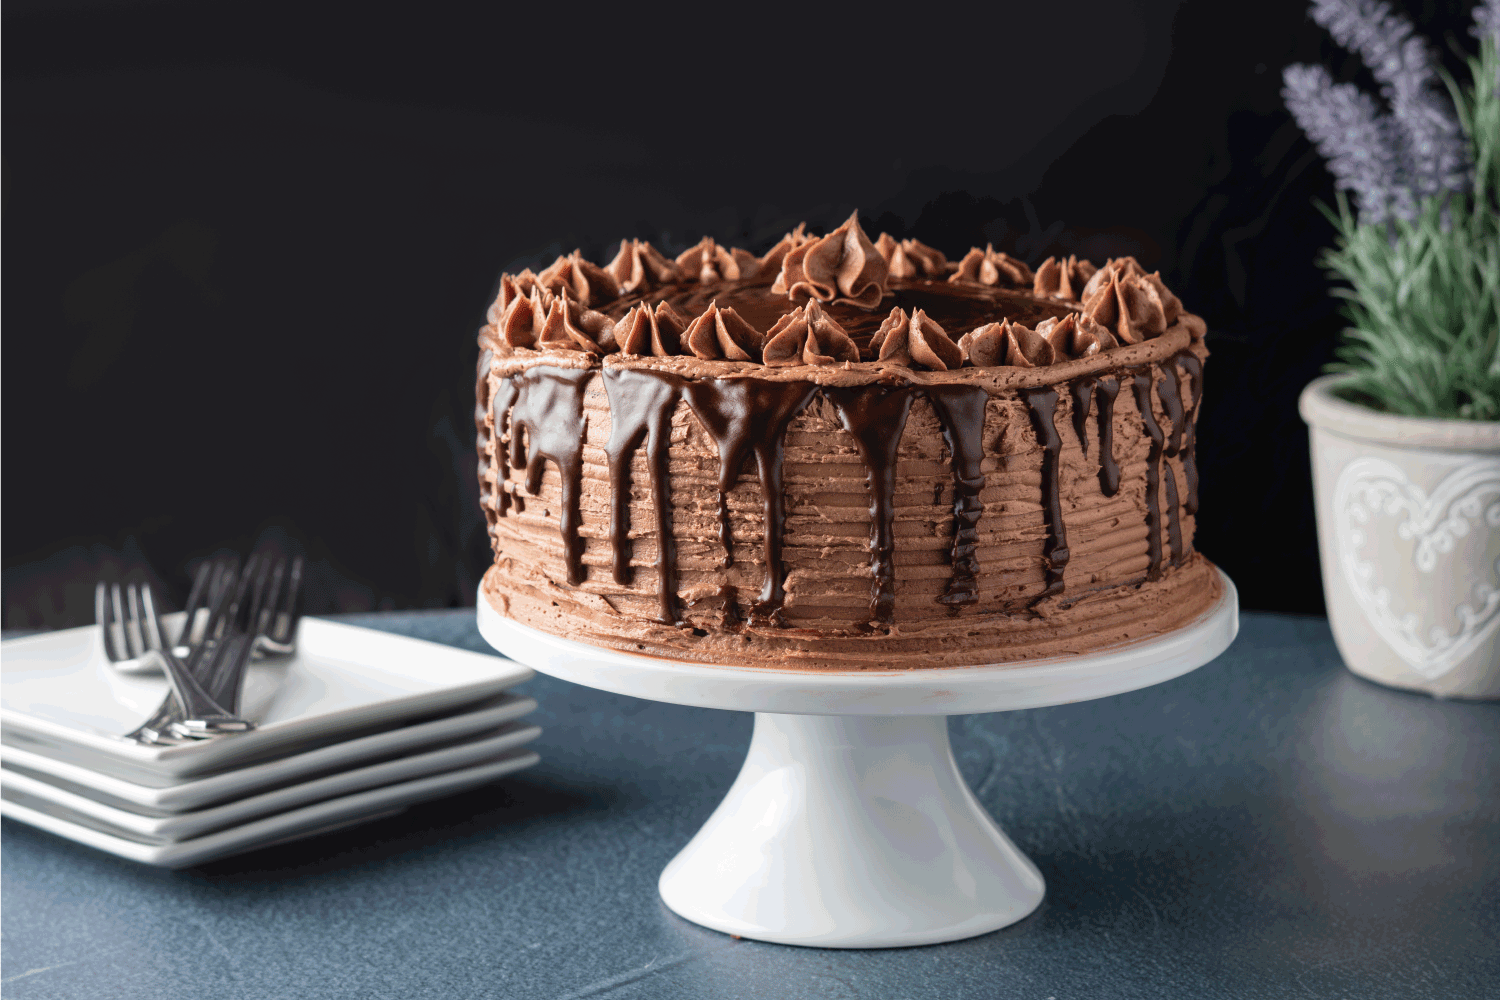 Decadent chocolate cake on a white cake platter. Cake is iced with chocolate buttercream frosting and drizzled with a chocolate ganache. White square plates and forks adorn the table